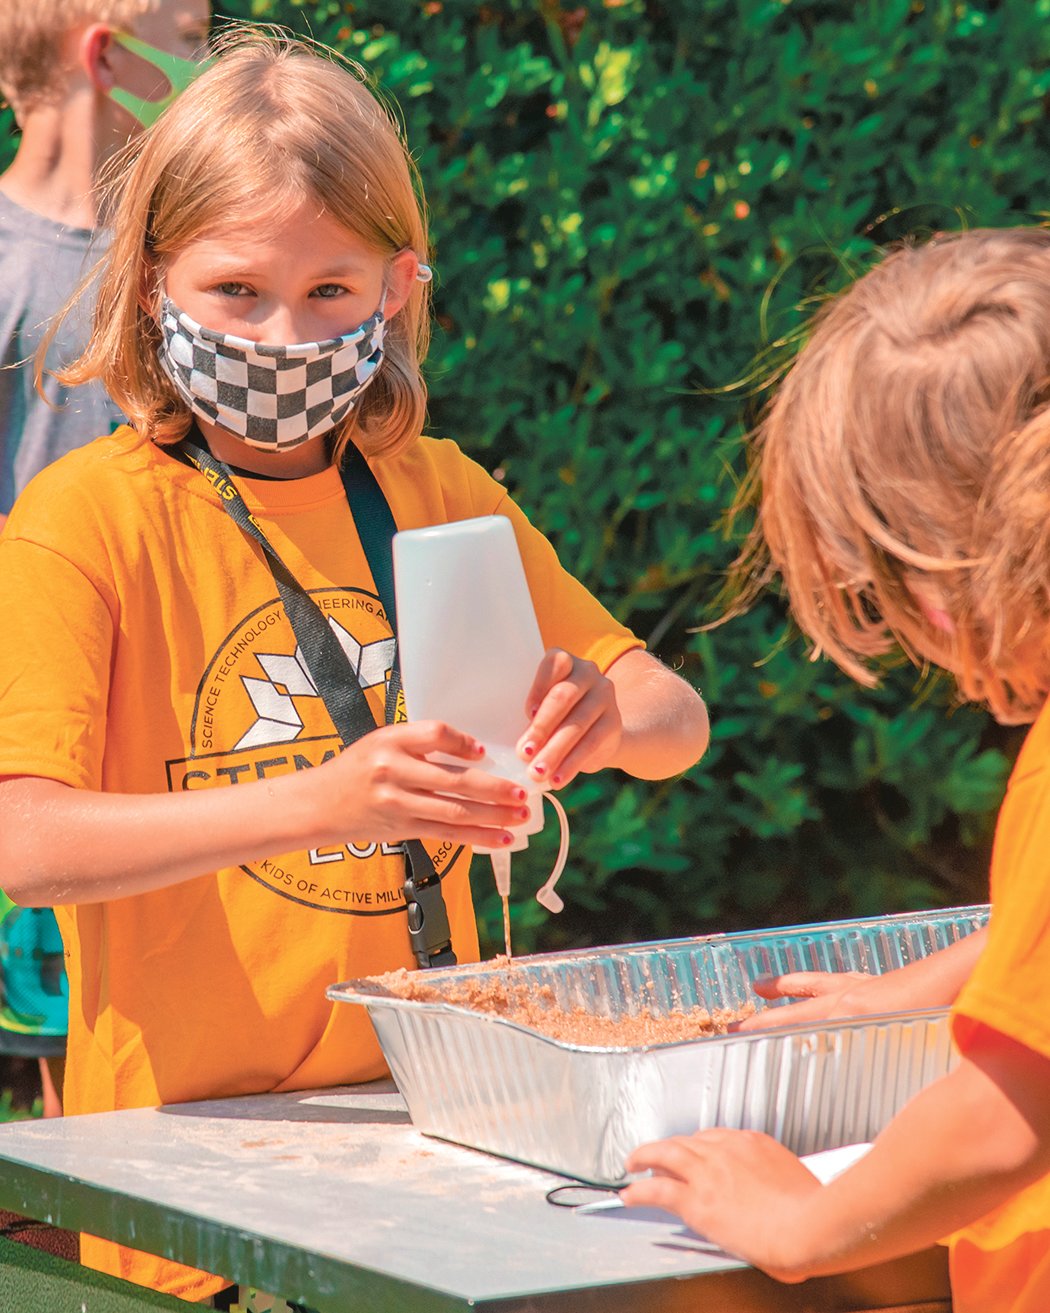 Students learn about erosion at Ridgeline Middle School in Yelm during STEMKAMP as they control the amount of water flowing through sand in aluminum bins on Thursday, Aug. 12.